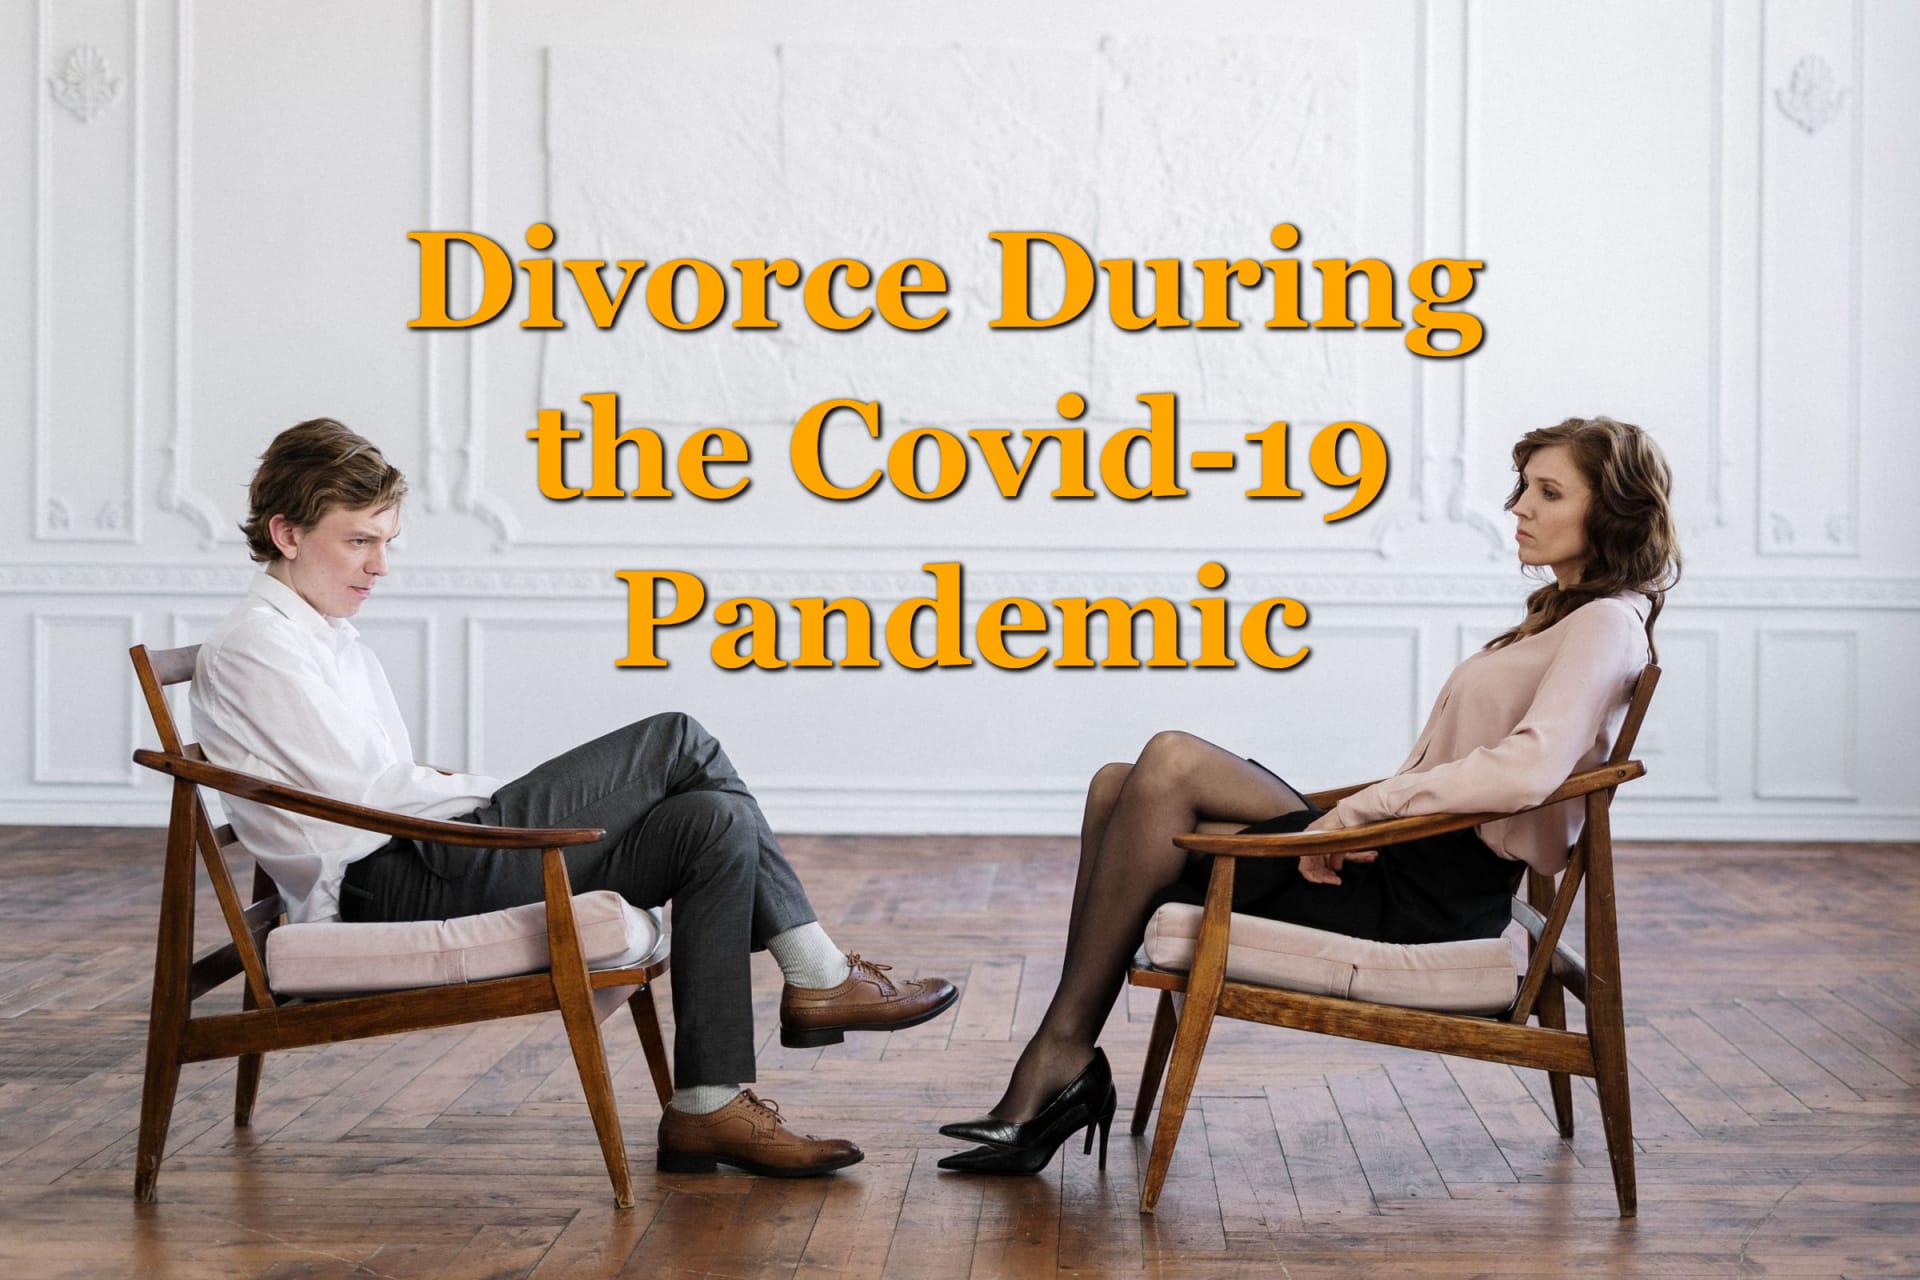 A couple seated in chairs facing each other trying to decide on divorce during the COVID-19 Pandemic